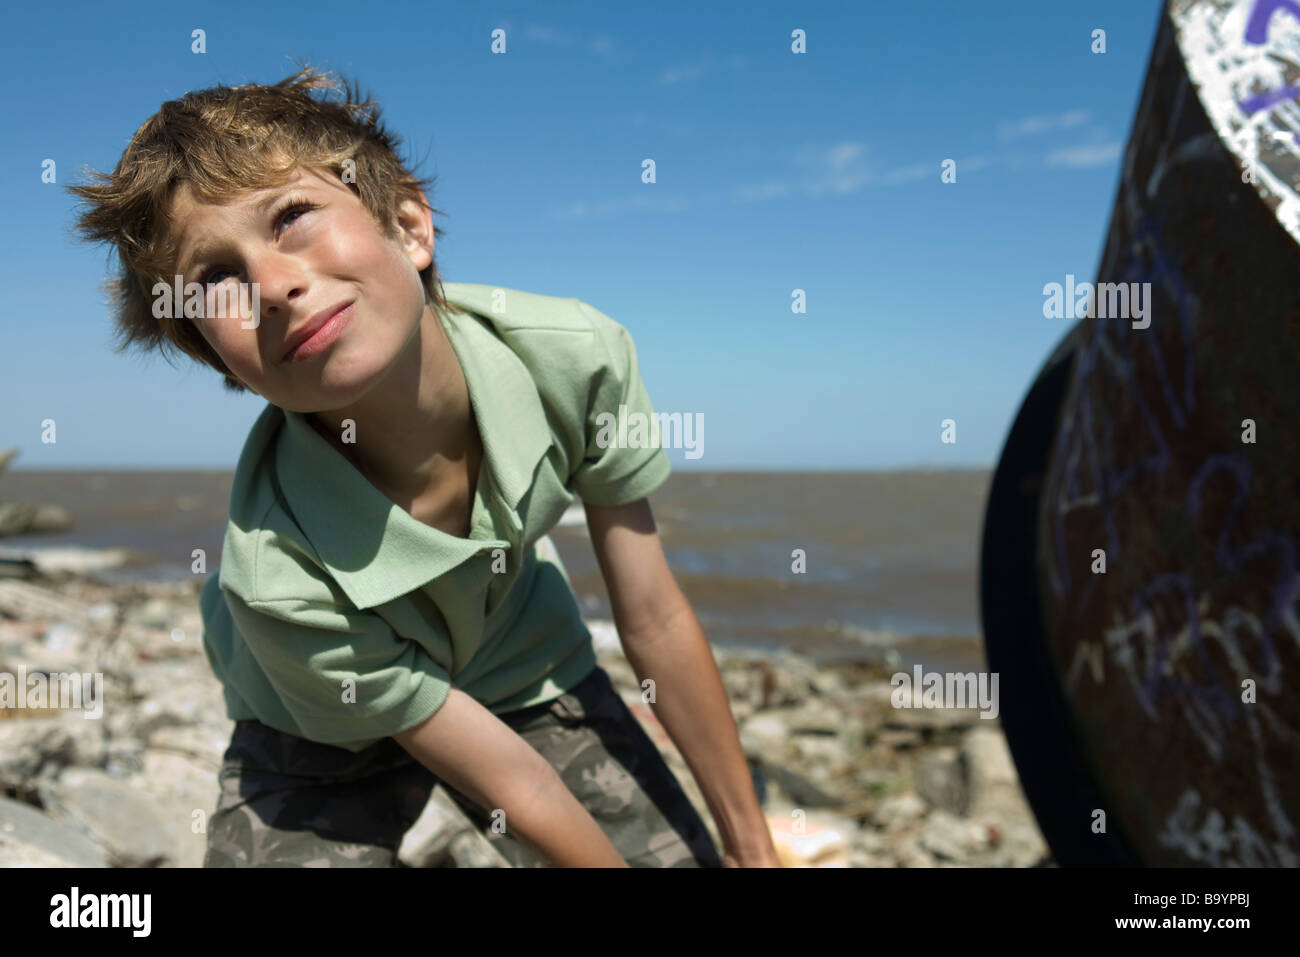 Boy on polluted shore, pulling large piece of scrap metal, close-up Stock Photo